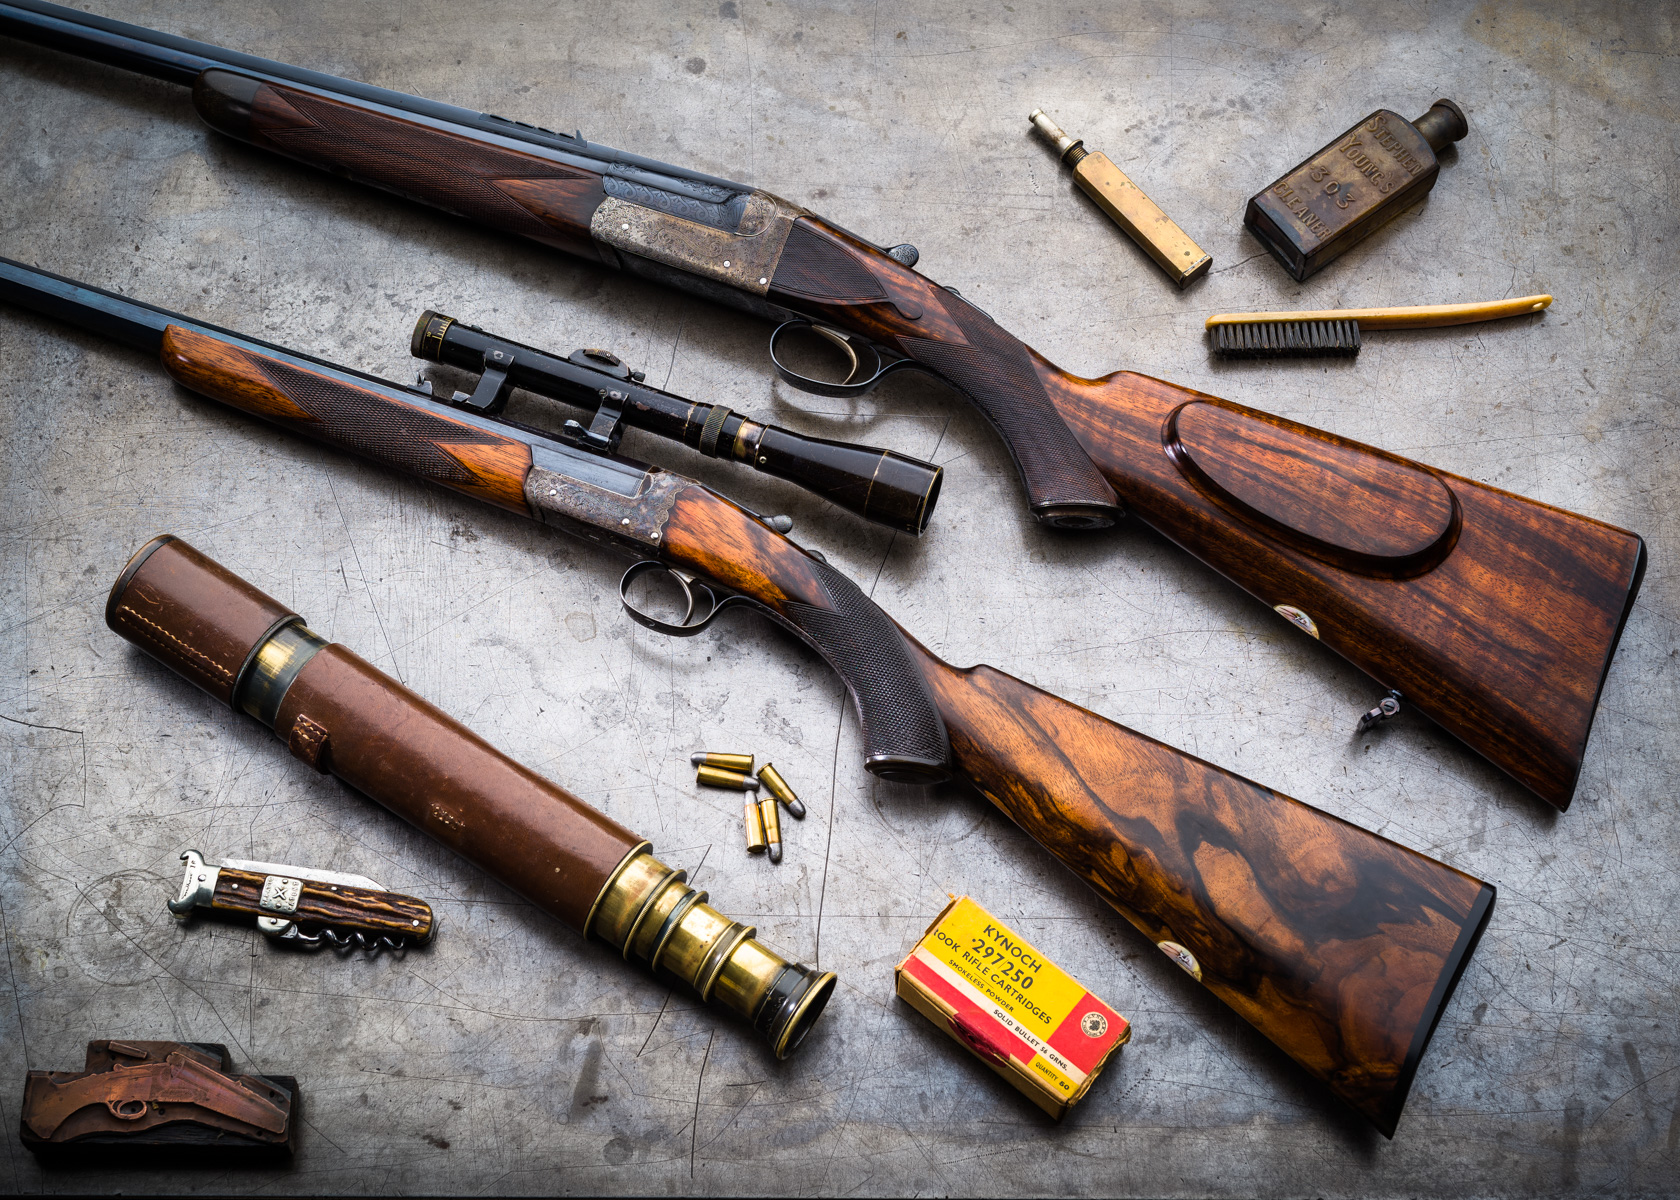 2 Westley Richards Single Shot Rifles. More confusion for the 80th!